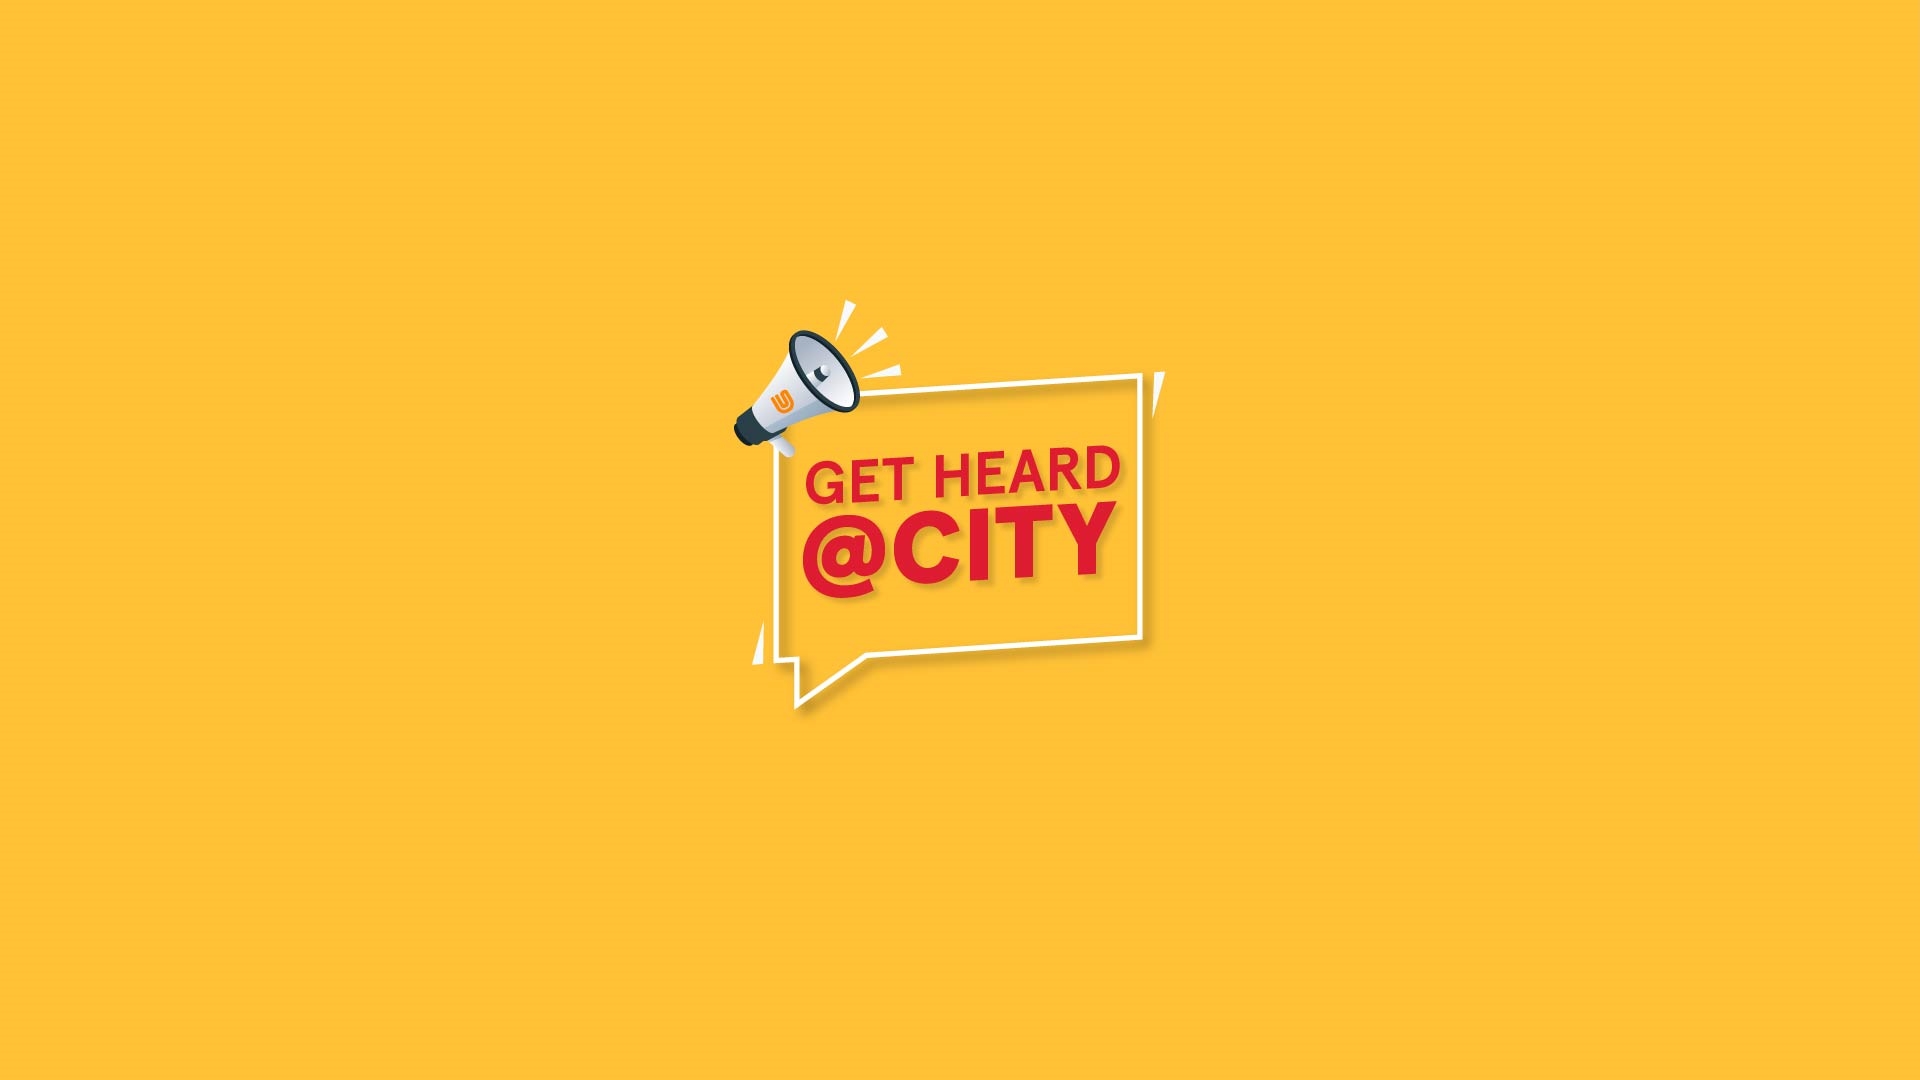 GetHeard@City is a tool to provide real feedback about your experience at City, University of London.